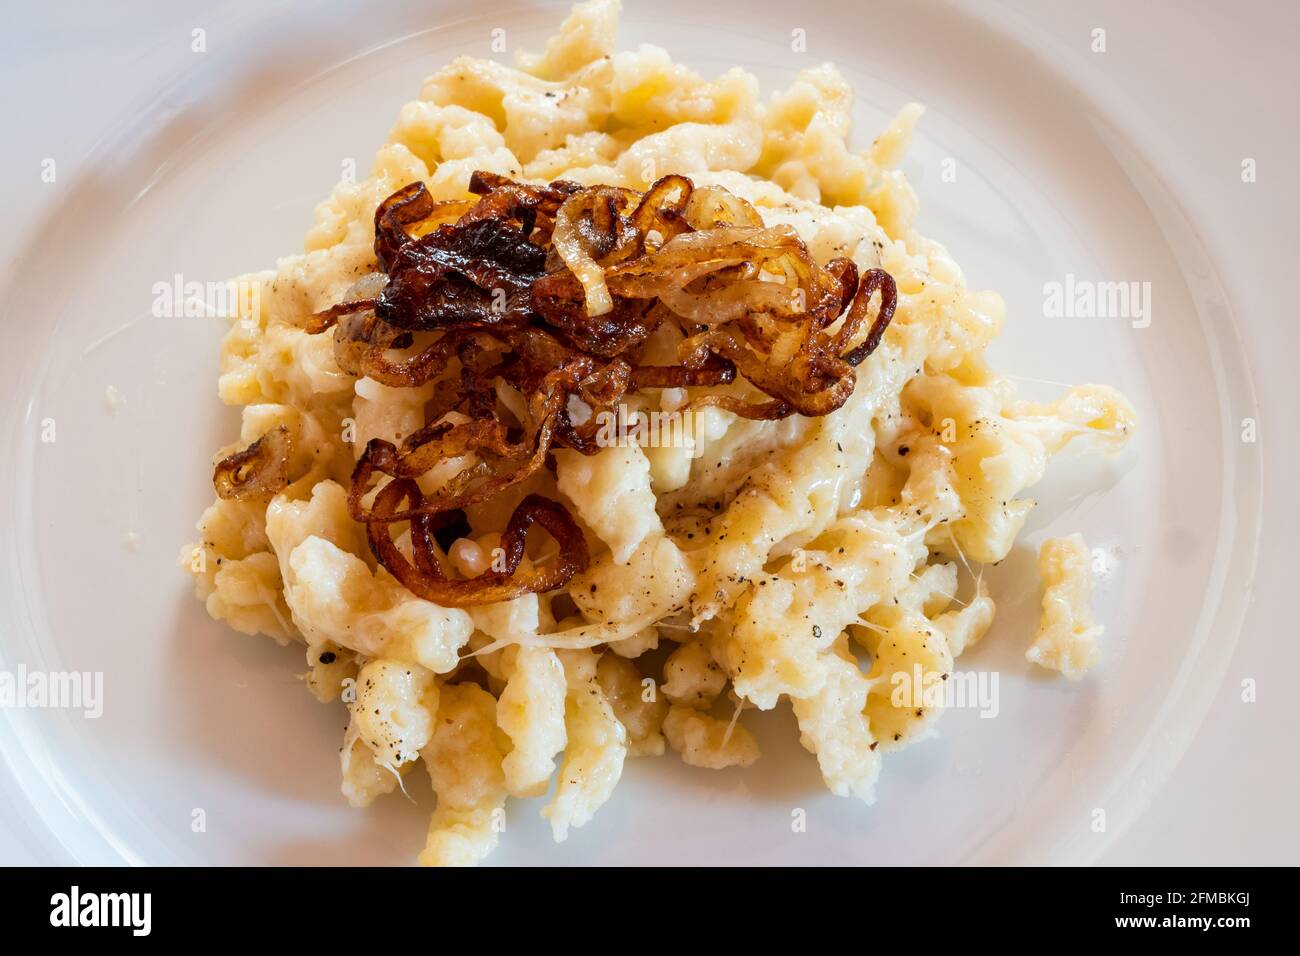 Tyrolean Chees Noodles or Pasta called Kaesespaetzle with Fried Onion on a White Plate, a Typical and Traditional Austrian Dish Stock Photo